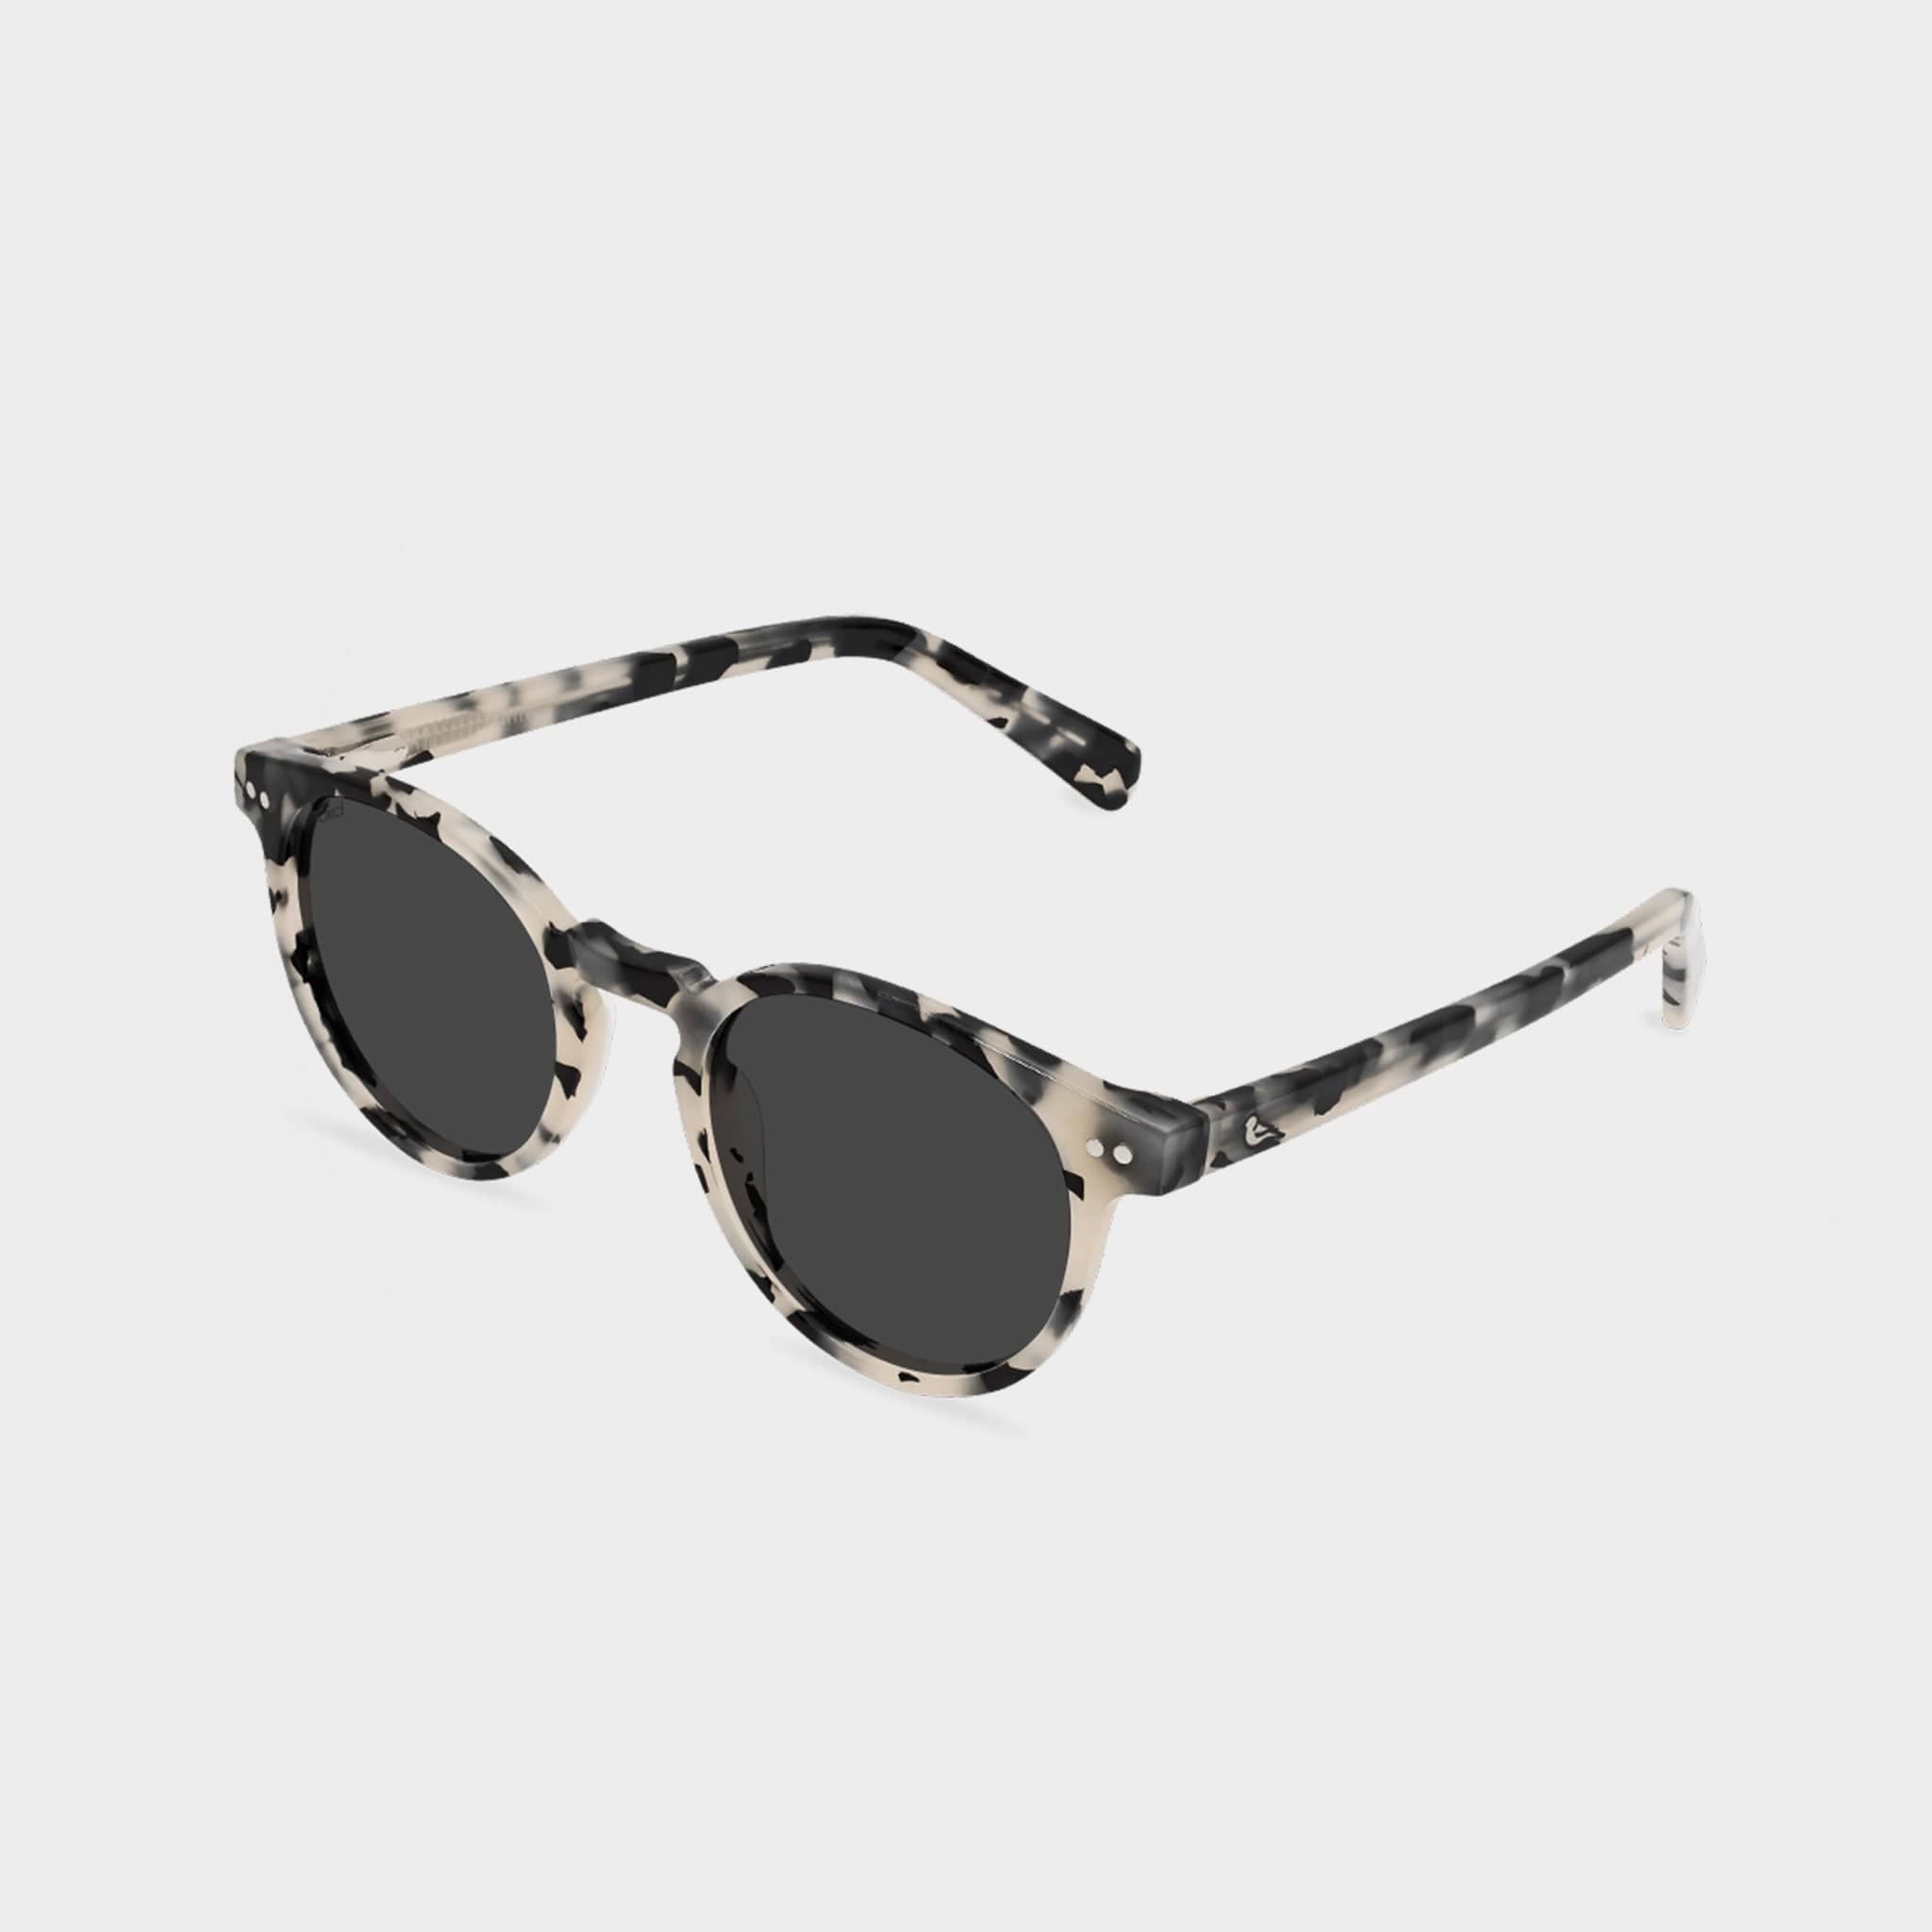 Best sunglasses for oval-shaped face